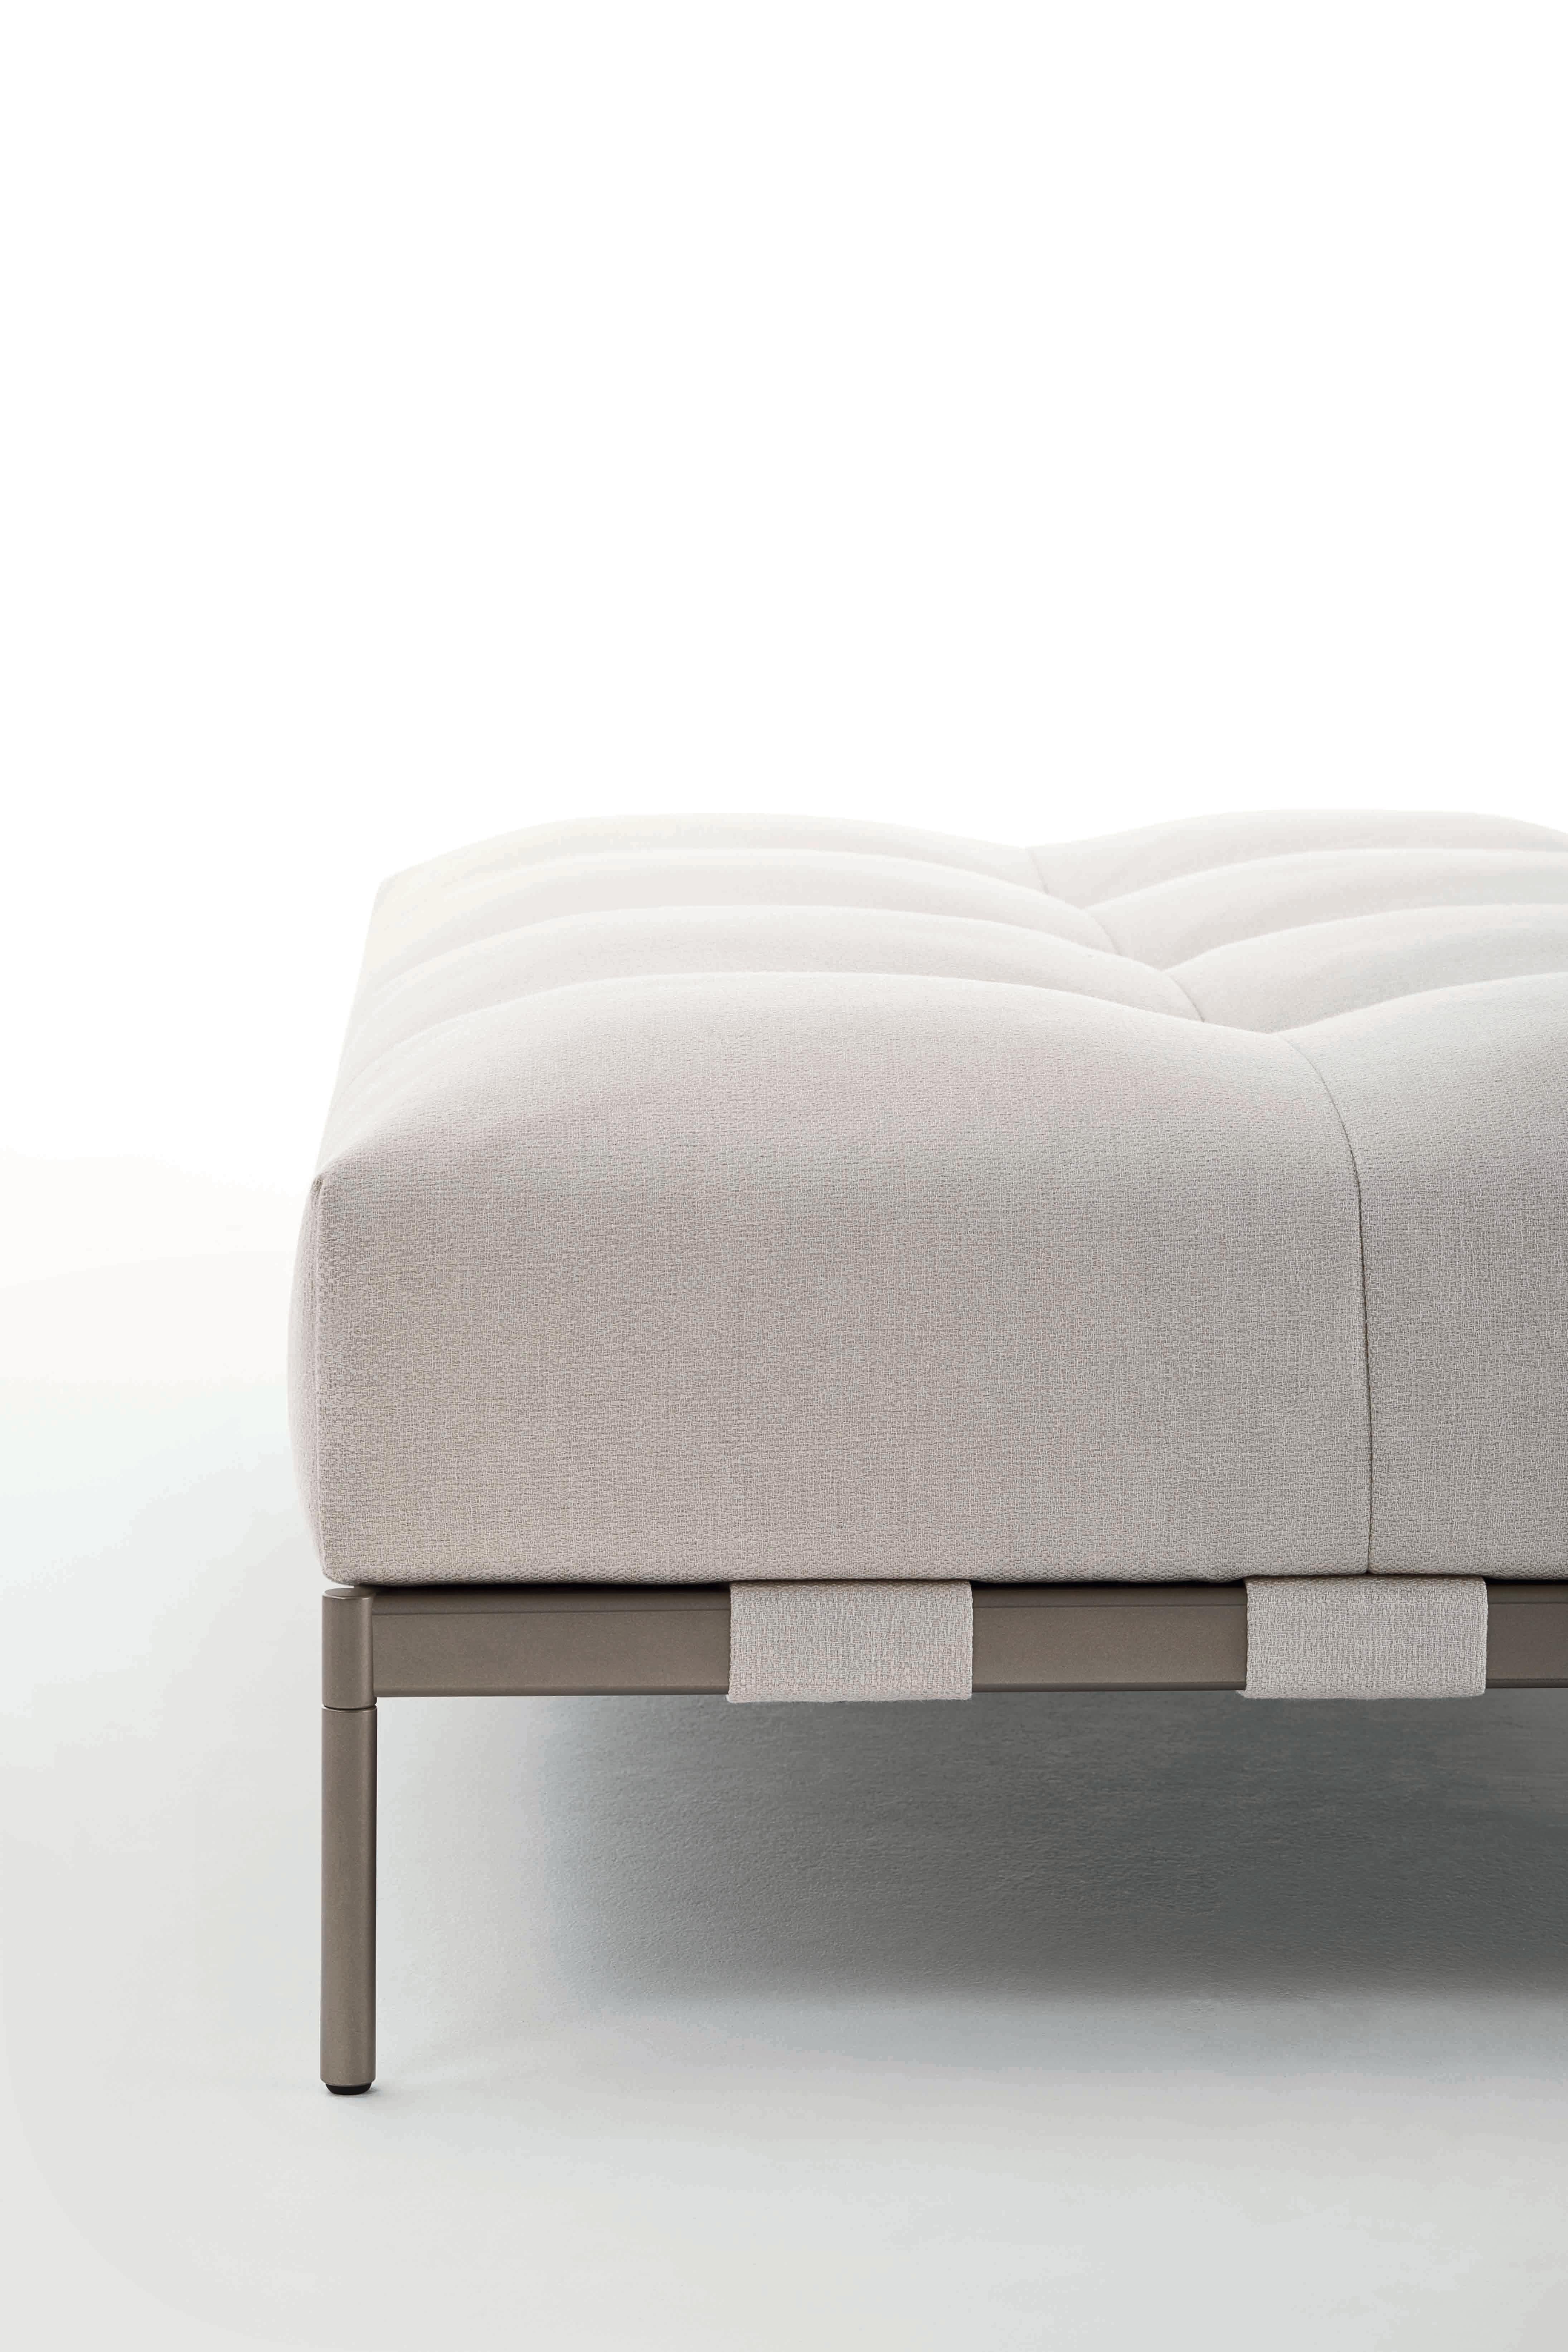 Pixel Light, the new seating system design by Sergio Bicego, stems from the desire to expand on the concept of form flexibility to reach a more sophisticated one of fluidity of spaces. We investigated new possibilities and uses for the Pixel sofa,